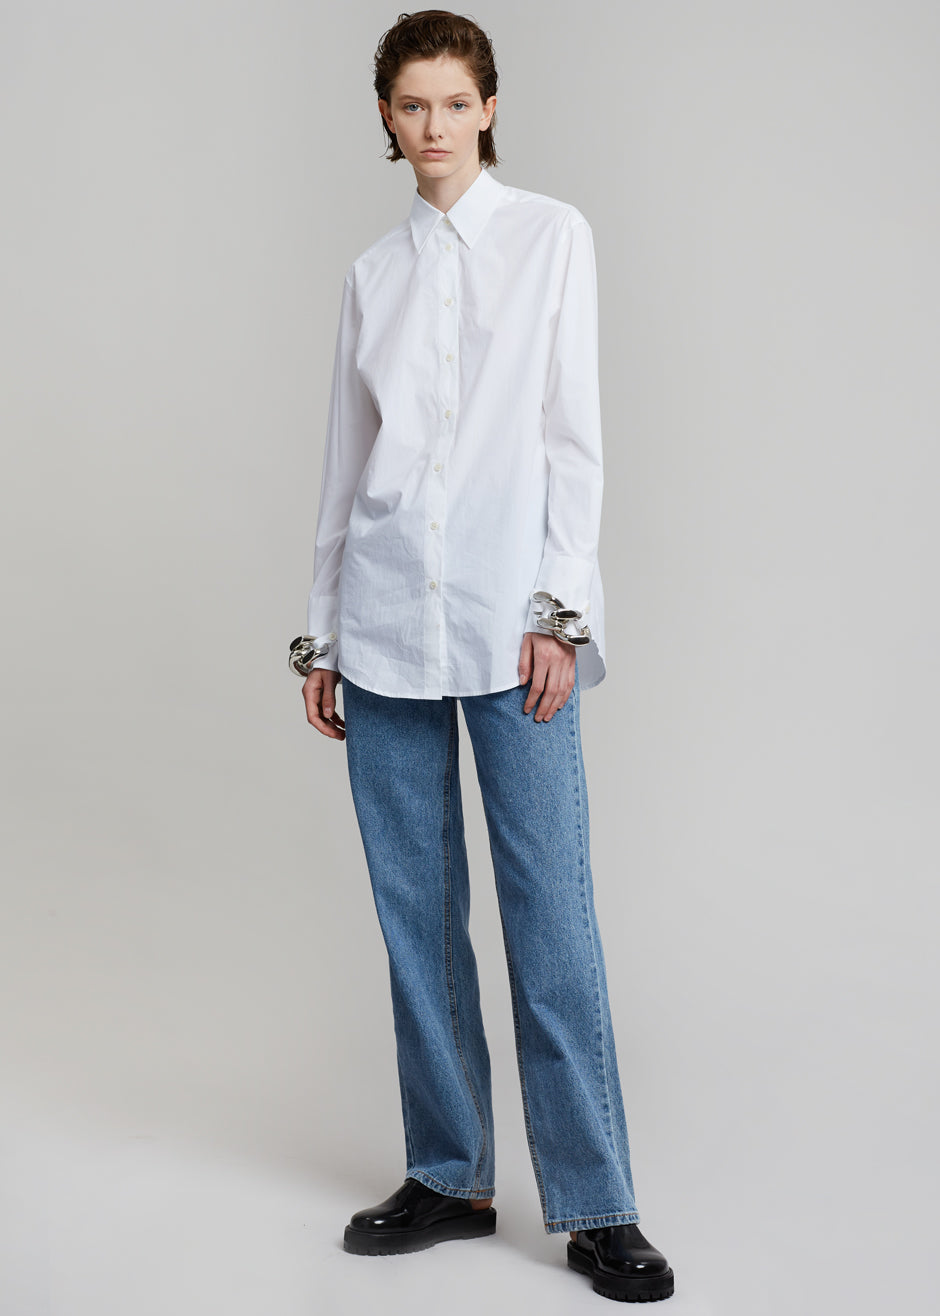 JW Anderson Silver Chain Link Shirt - White - 4